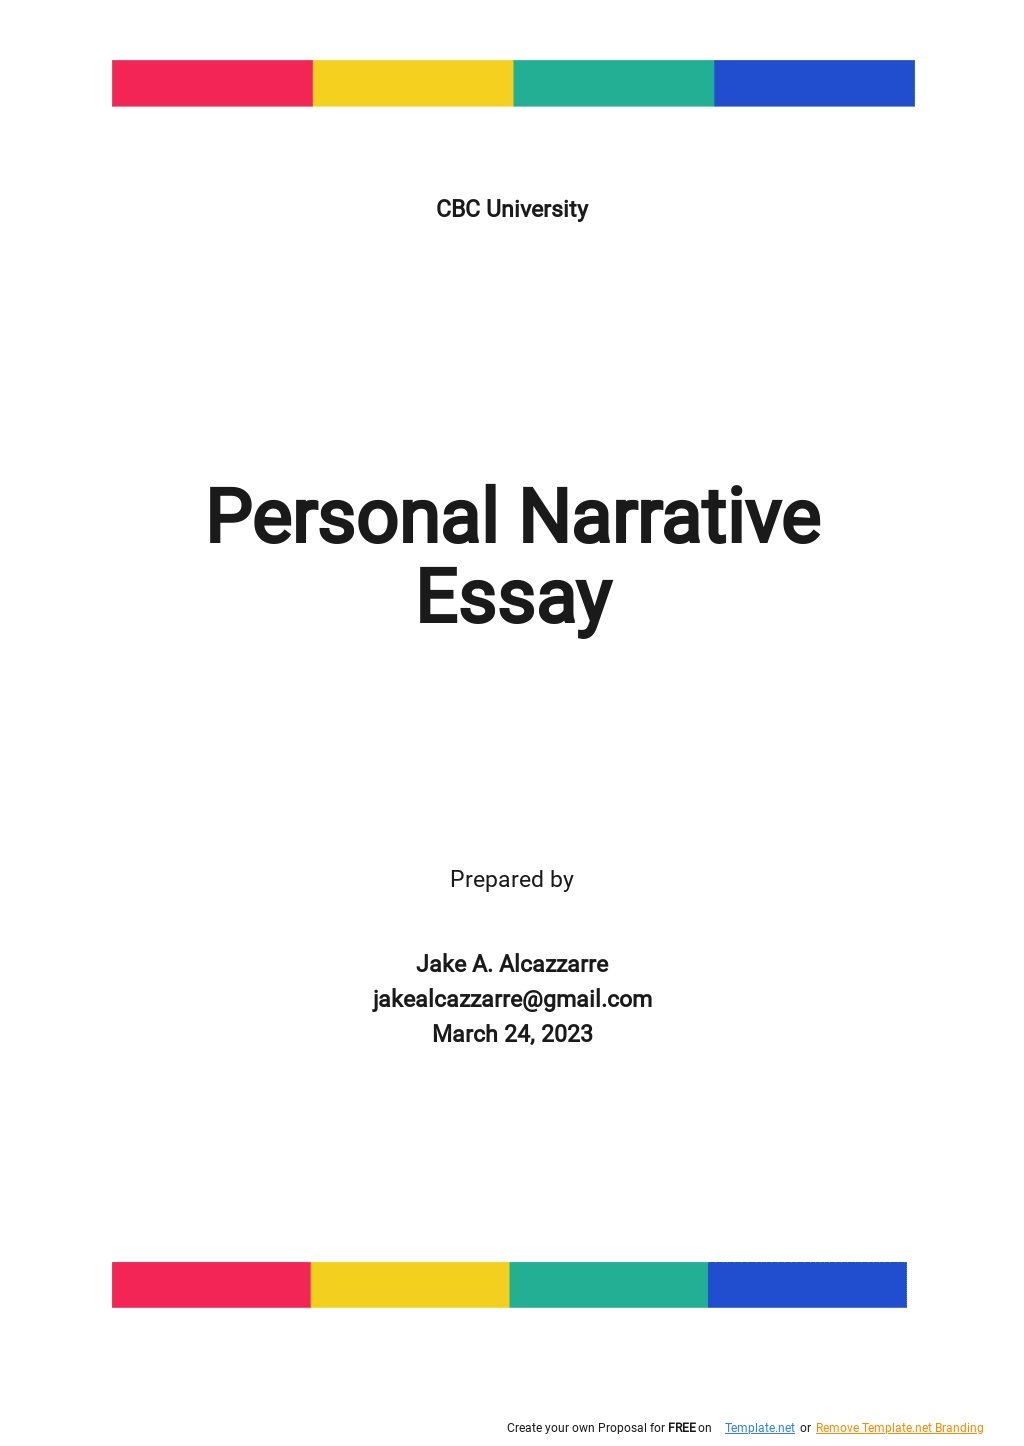 Personal Narrative Essay Template in Word, Google Docs, Apple Pages